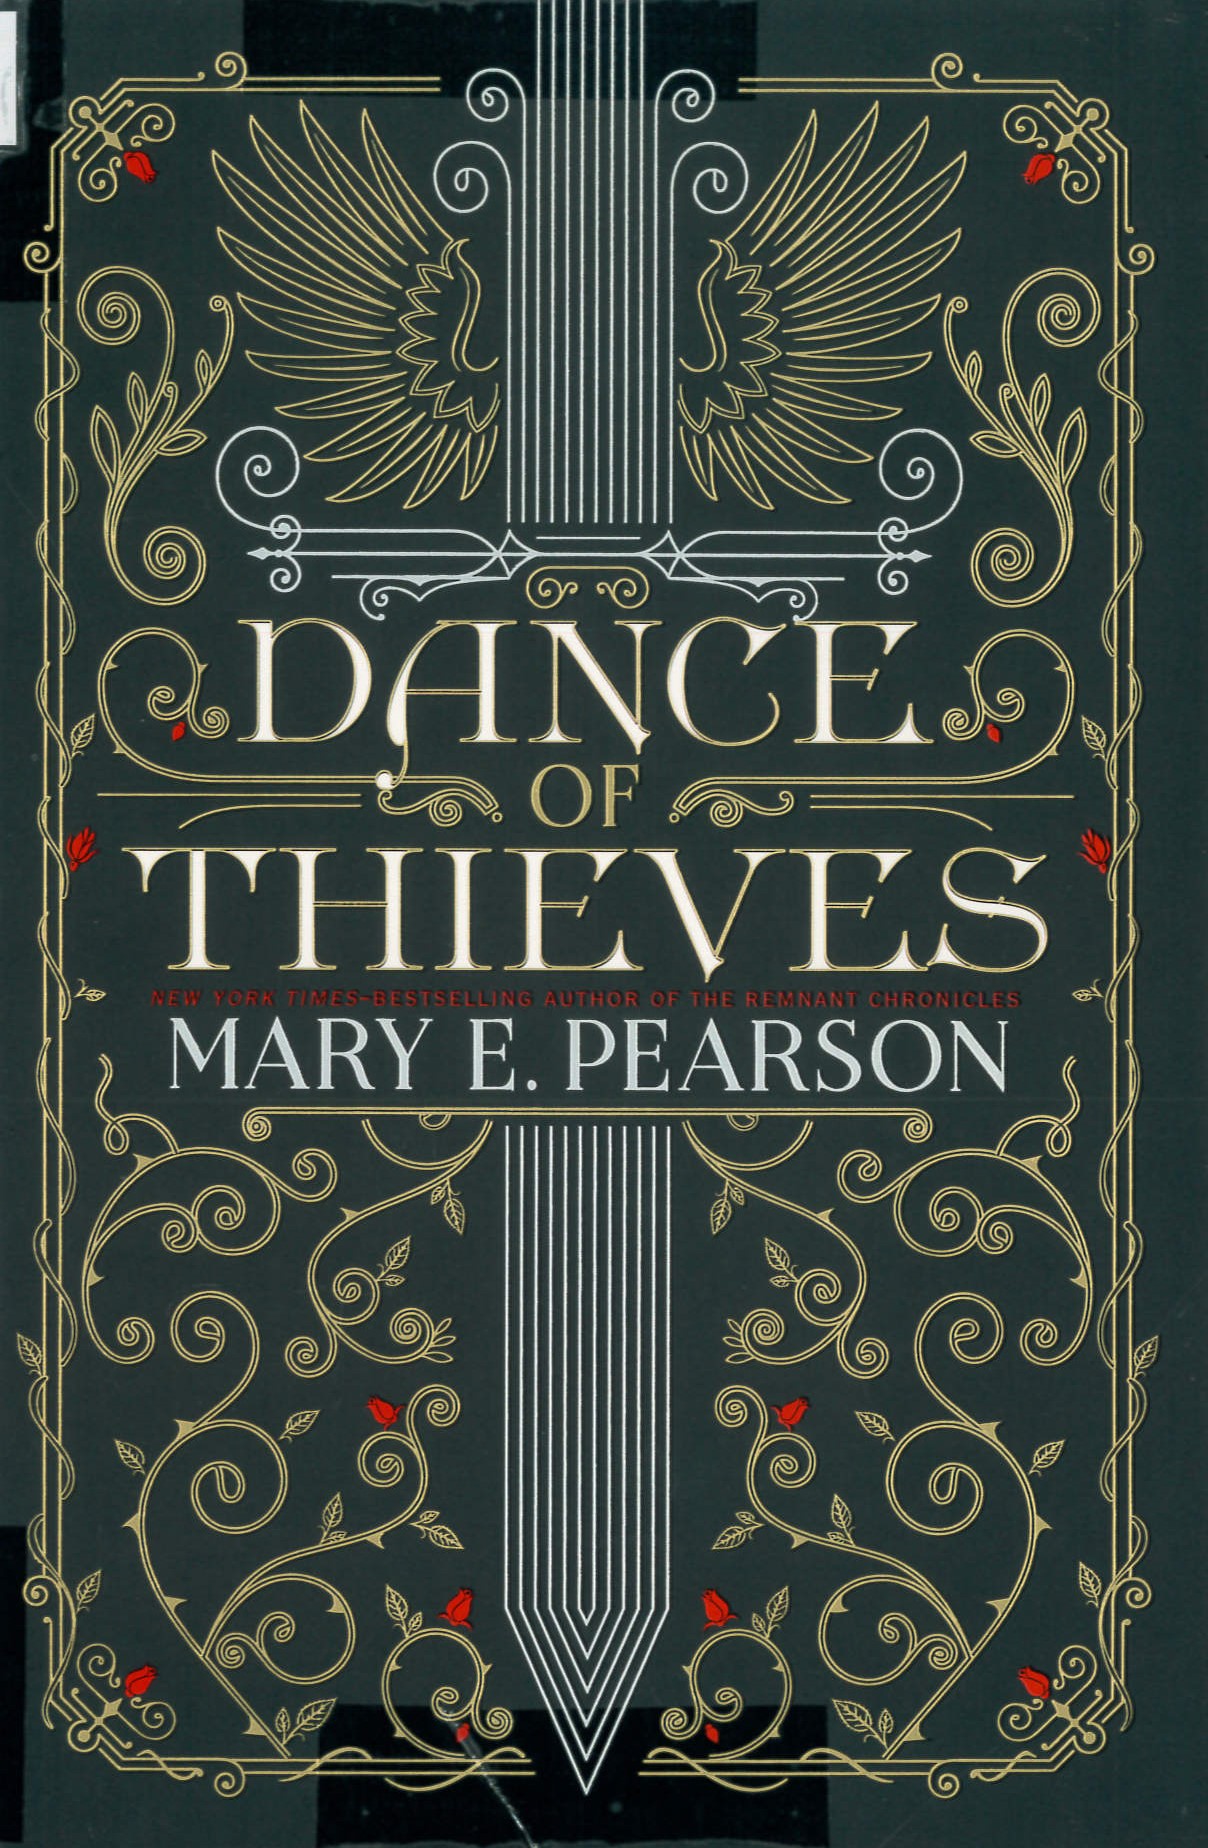 Dance of thieves /